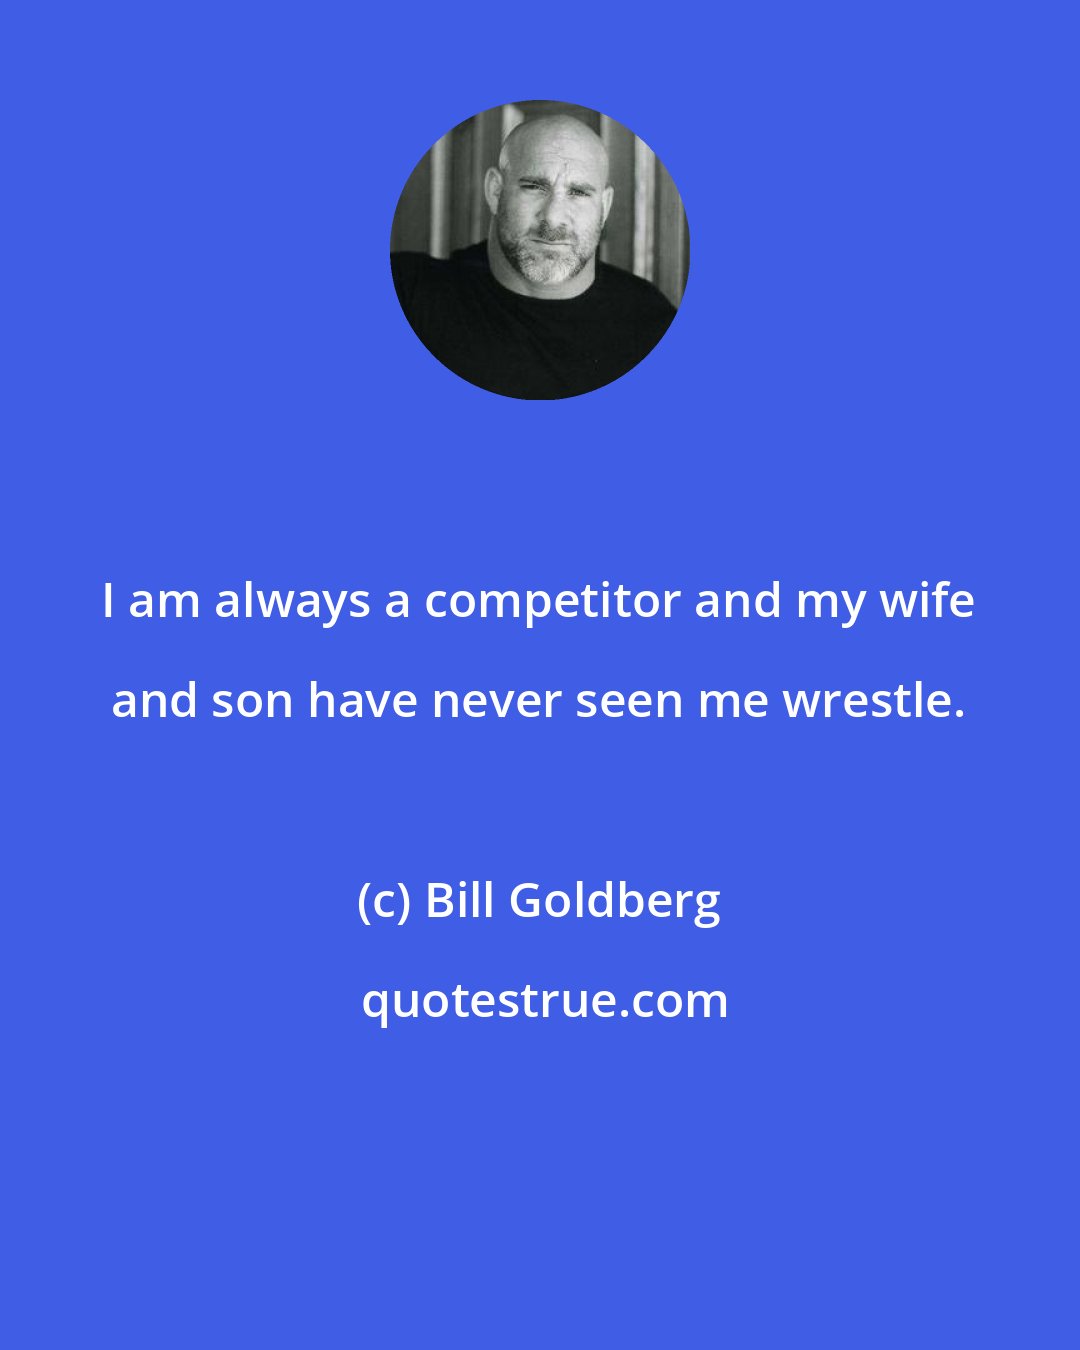 Bill Goldberg: I am always a competitor and my wife and son have never seen me wrestle.